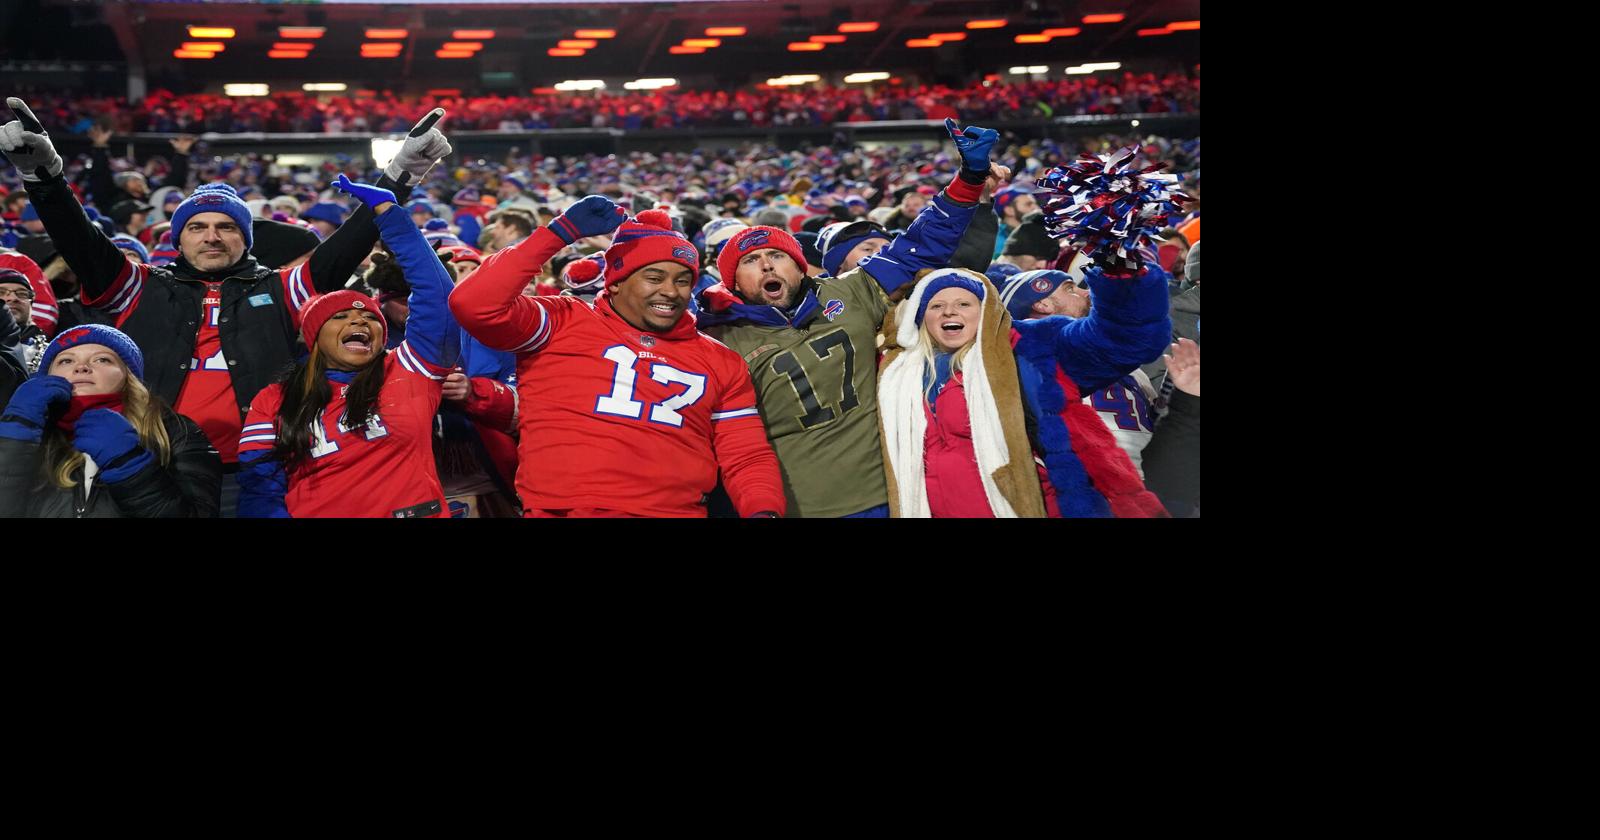 Bills game delayed, fans warned with 15-yard penalty for throwing